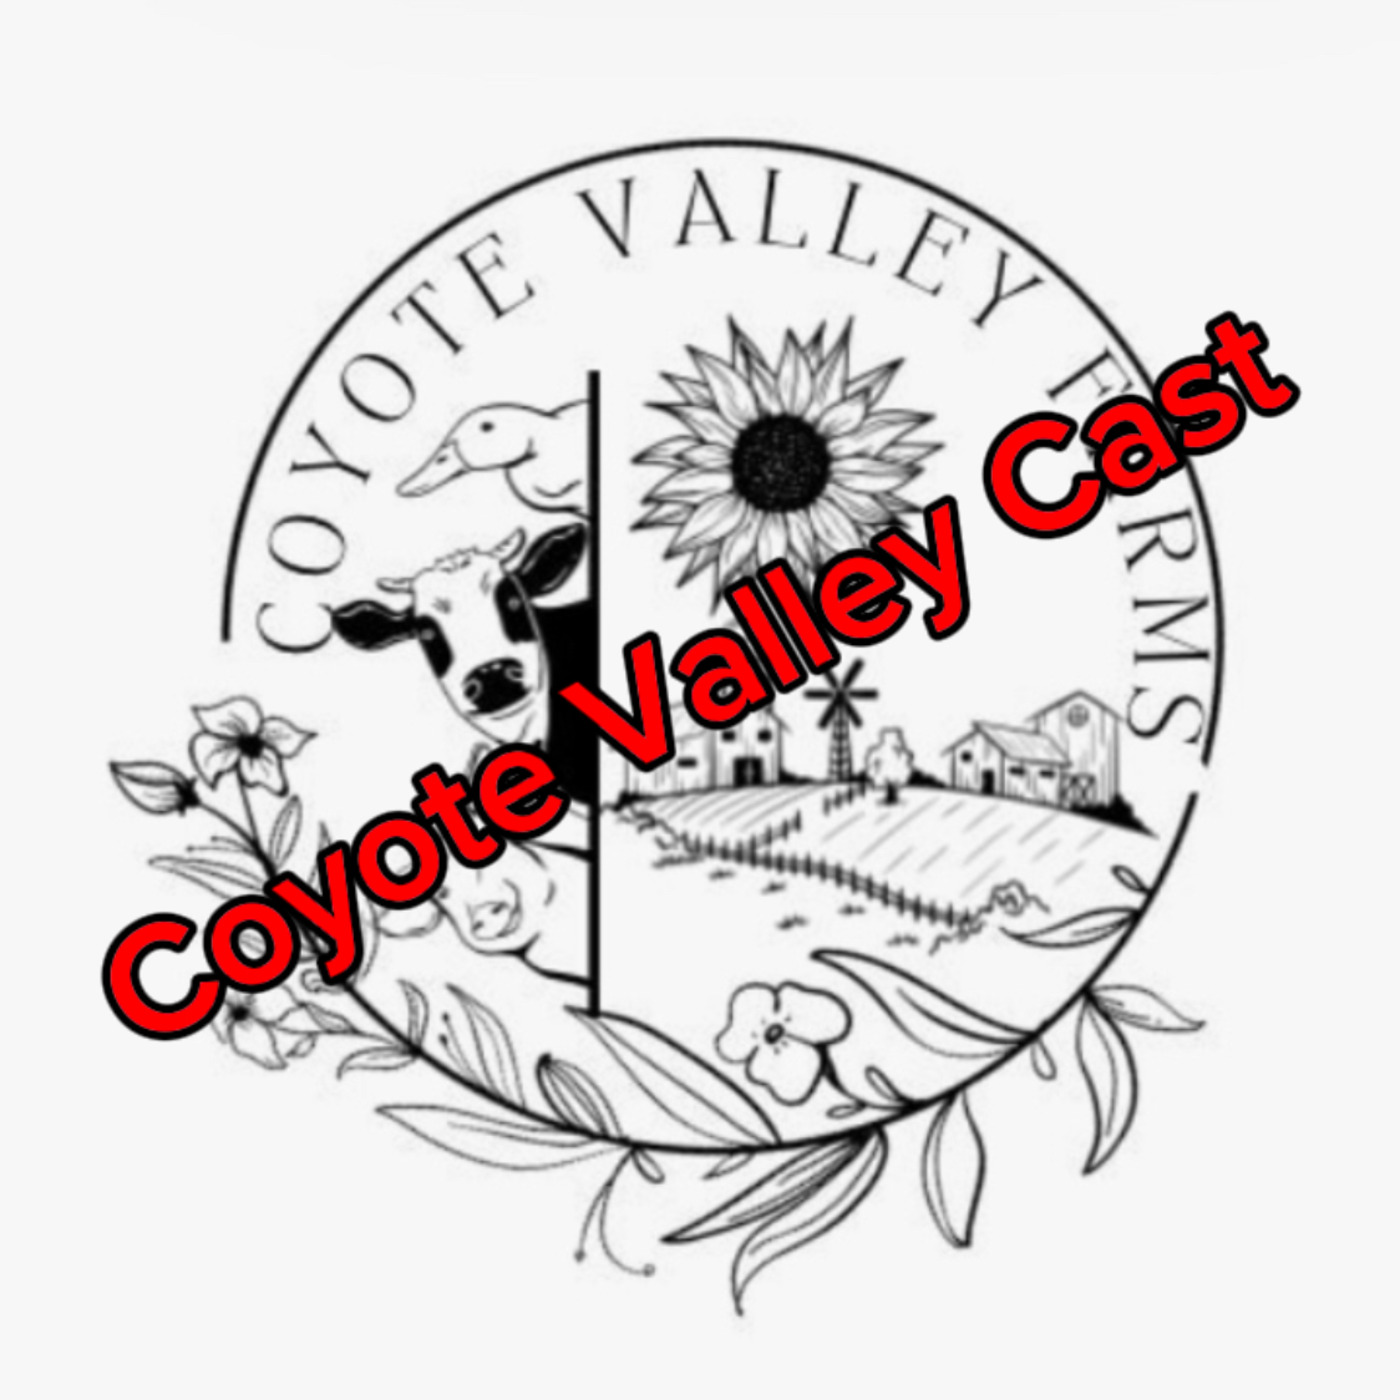 Coyote Valley Cast